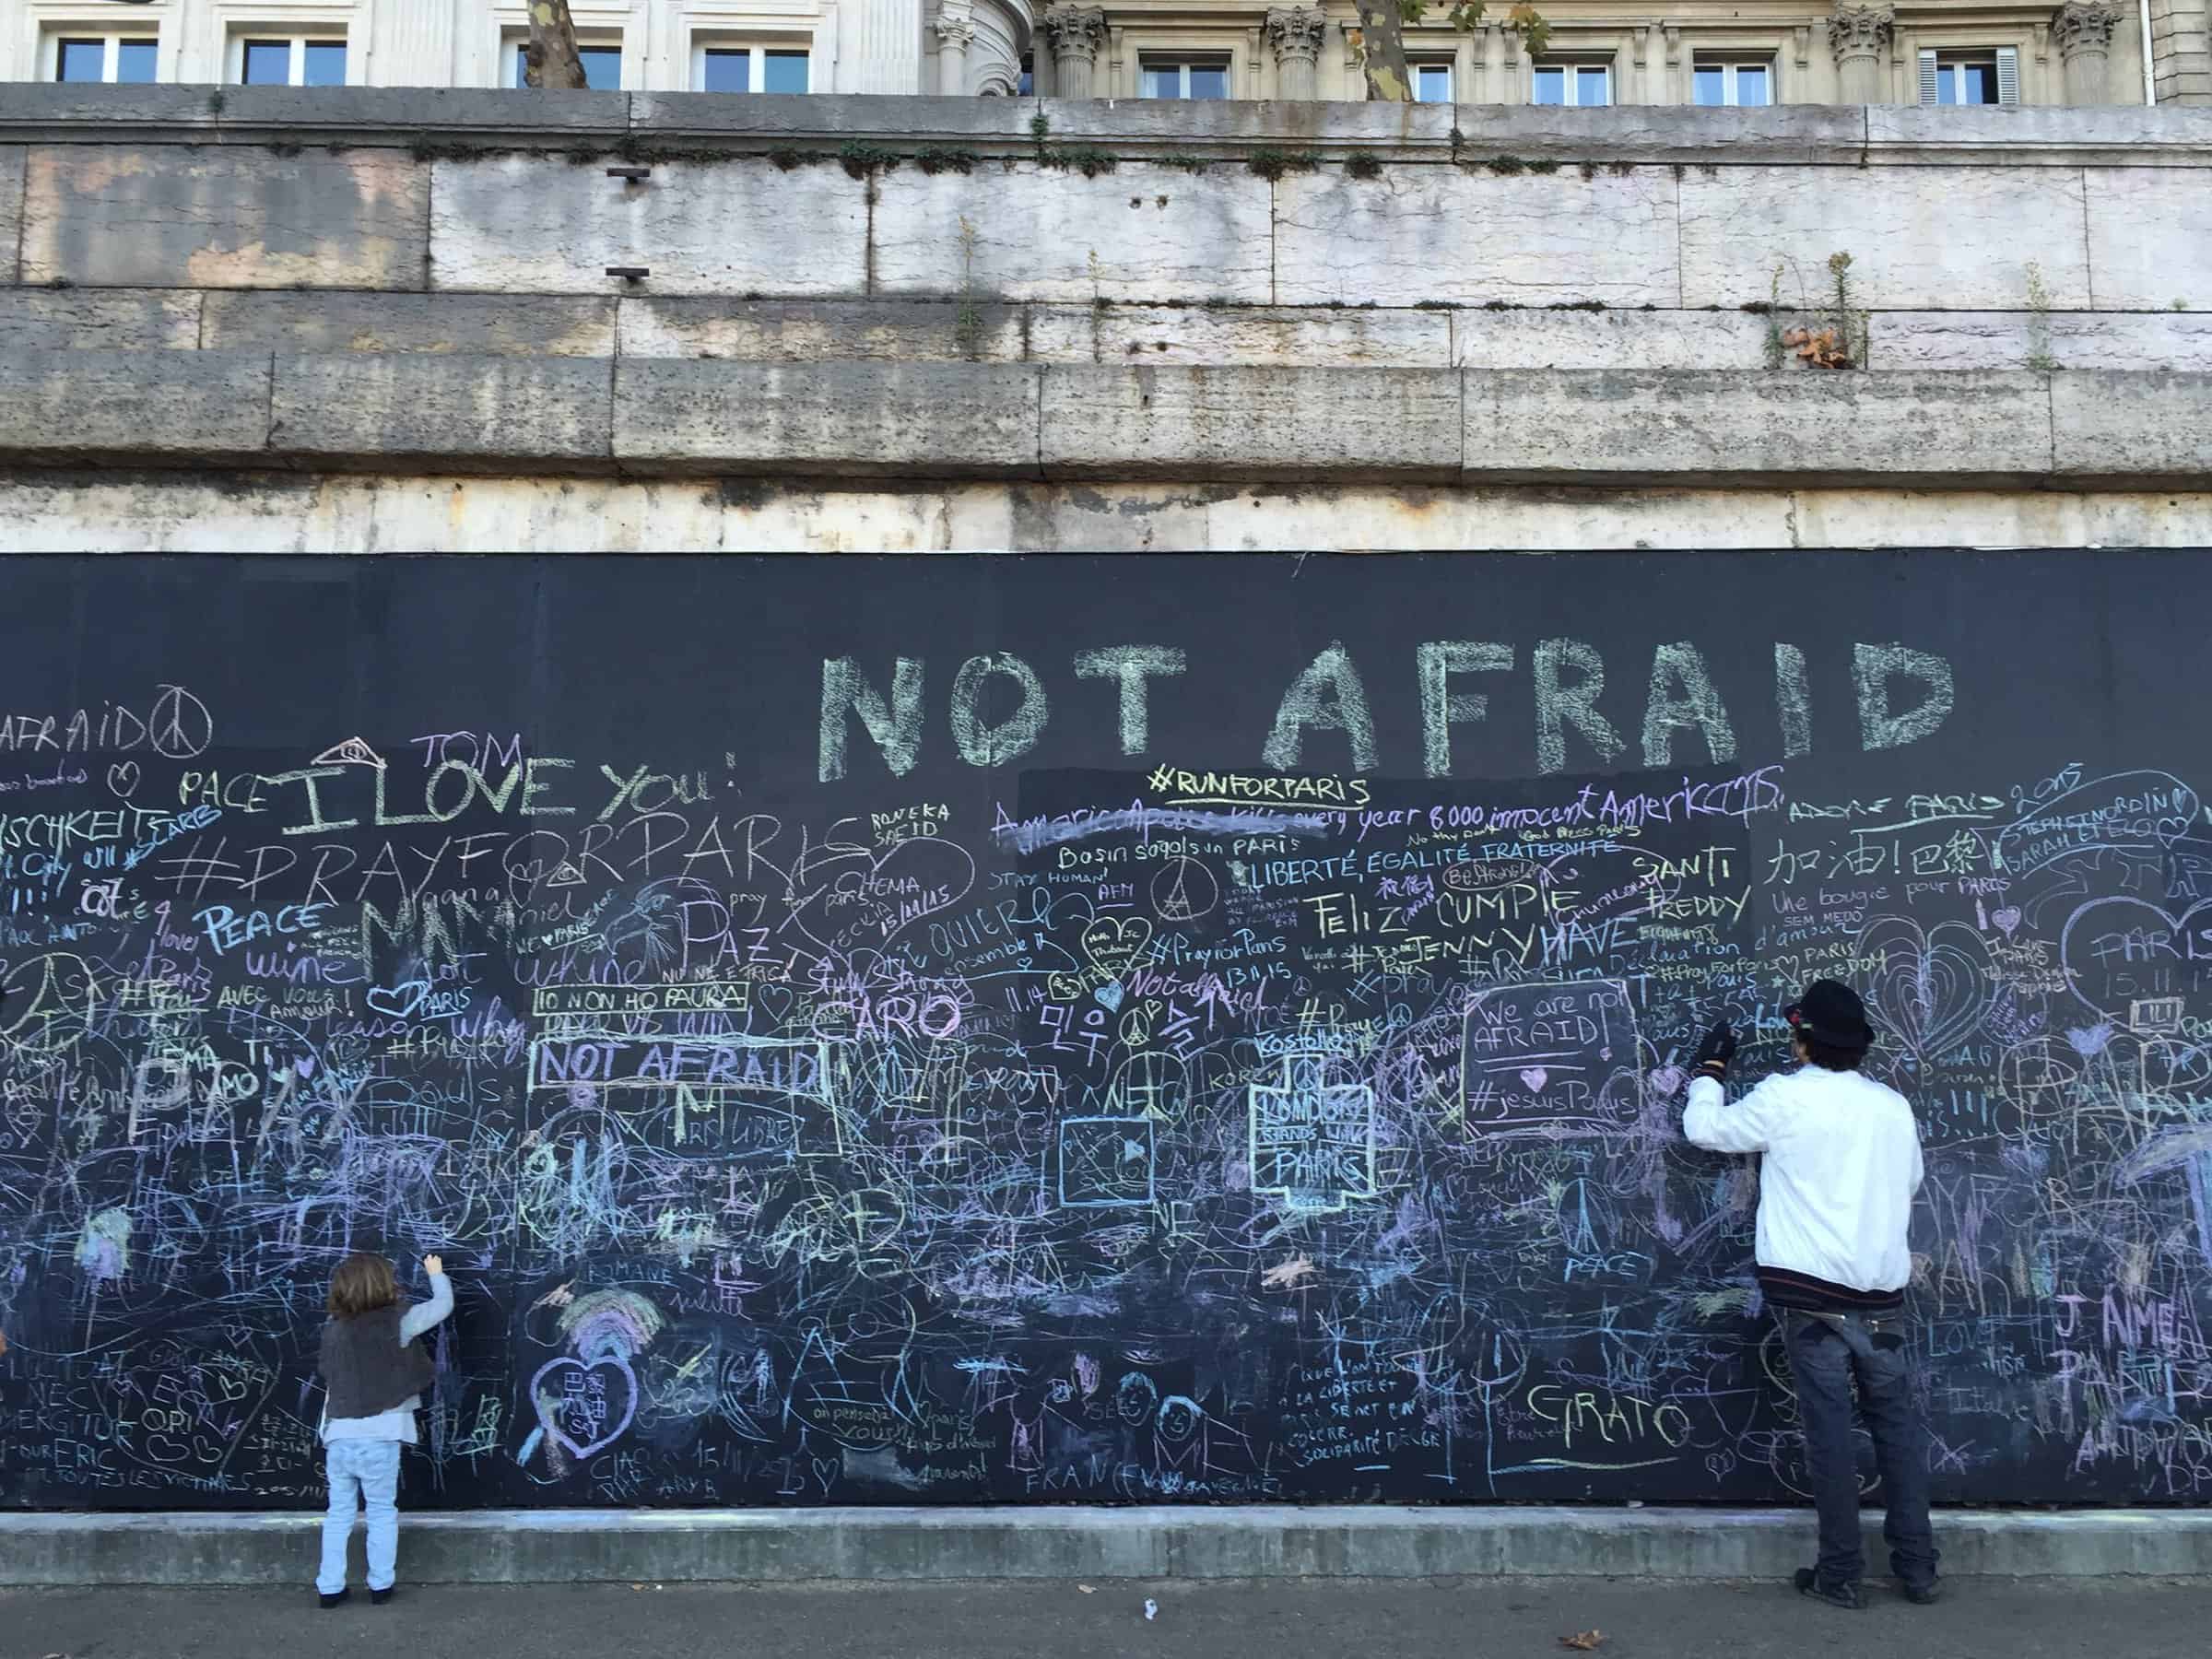 Reflections from Paris: November 13, 2015 and the Prospect of Peace